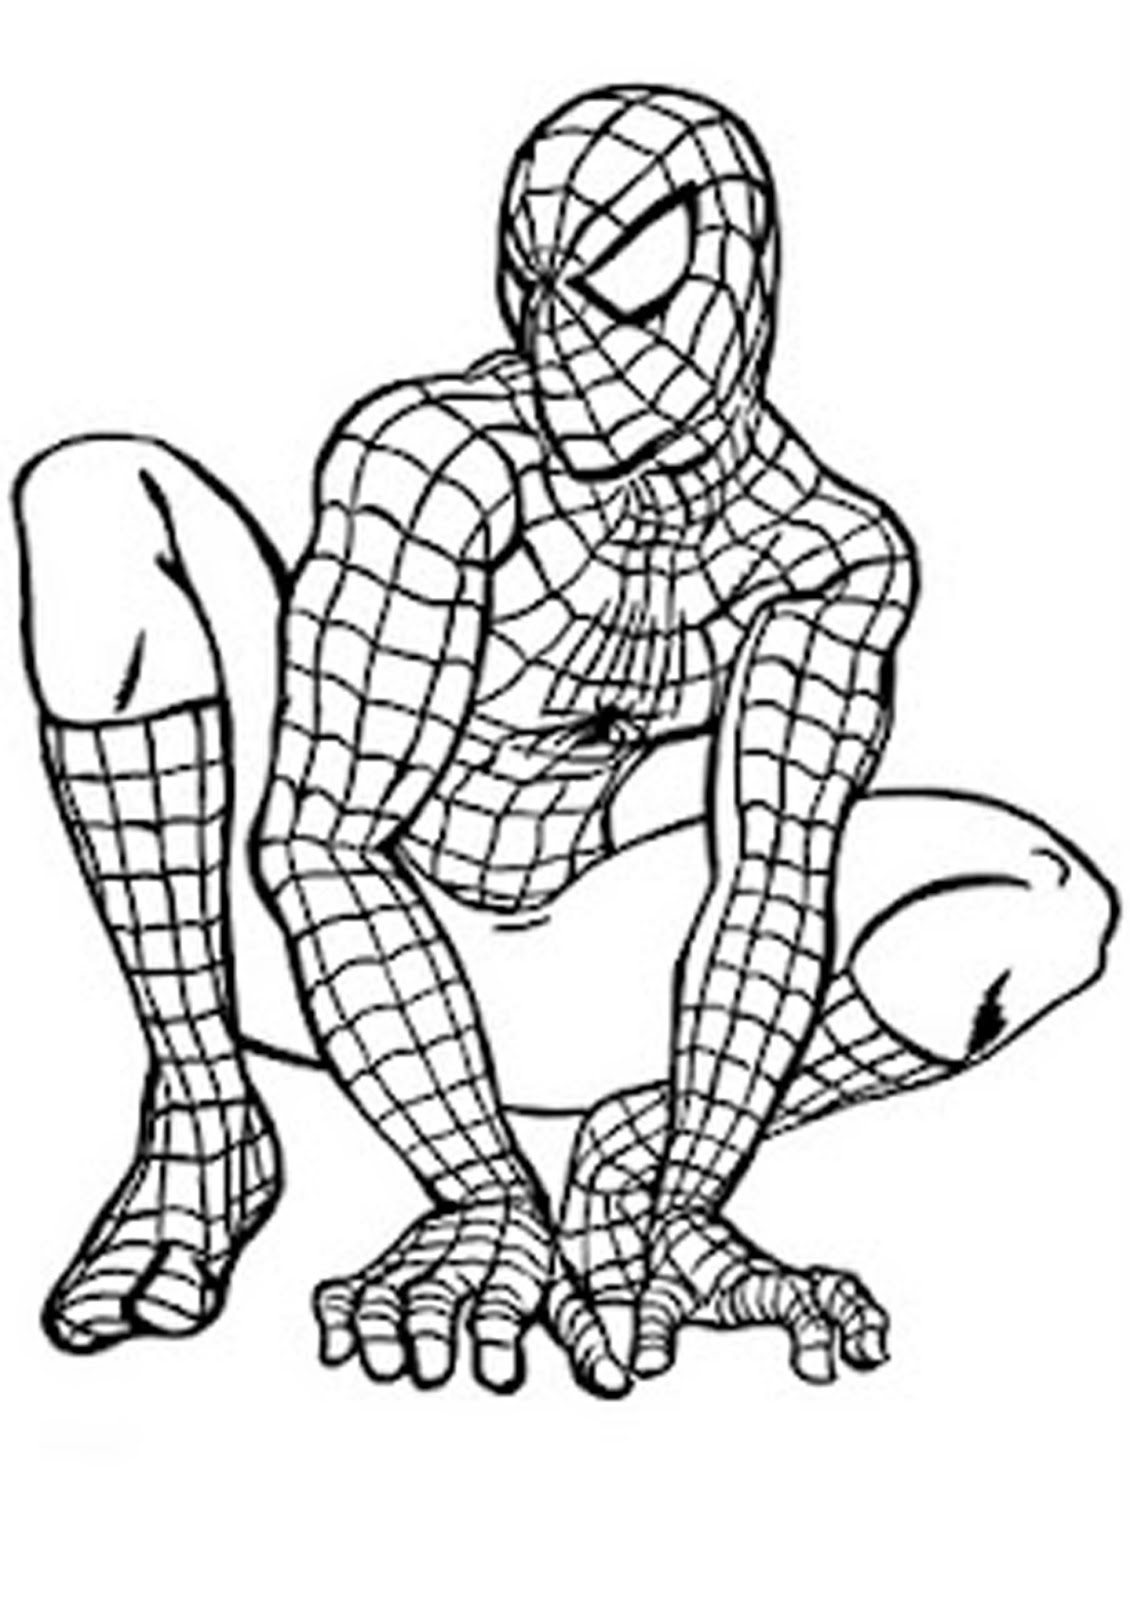 Coloring Page World: Spiderman